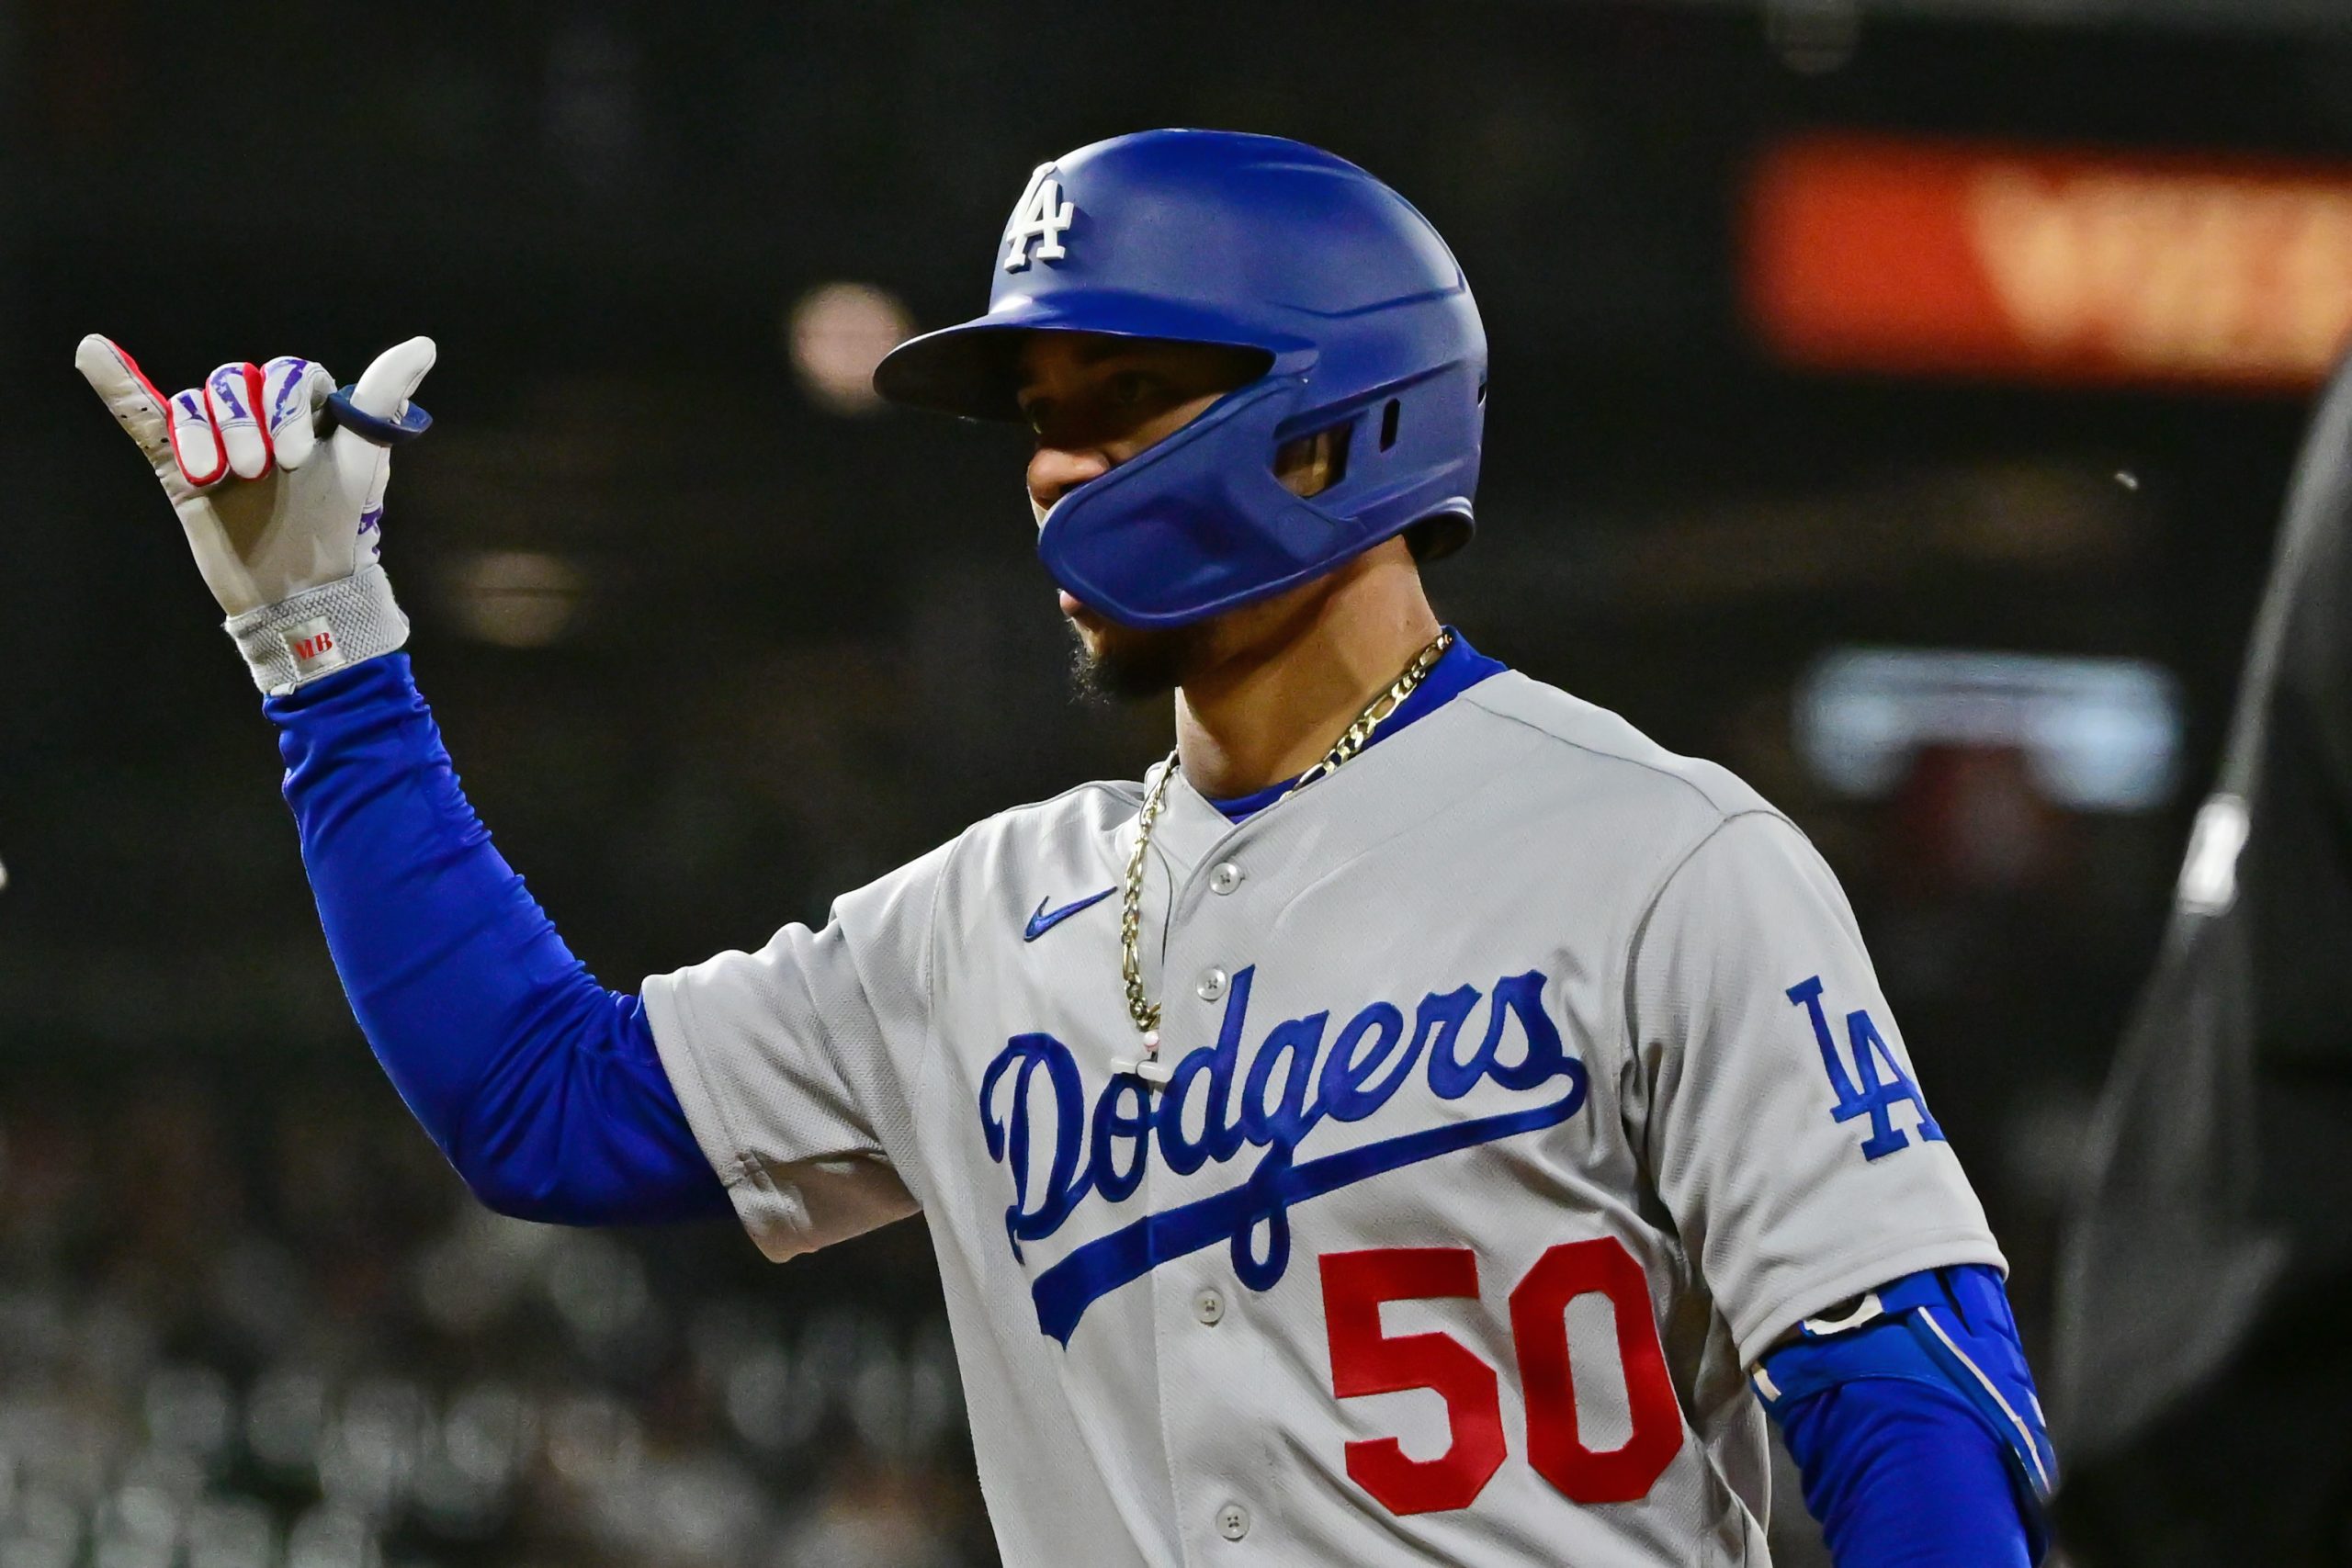 Mookie Betts of the Los Angeles Dodgers reacts after his single in the ninth inning against the Chicago White Sox.